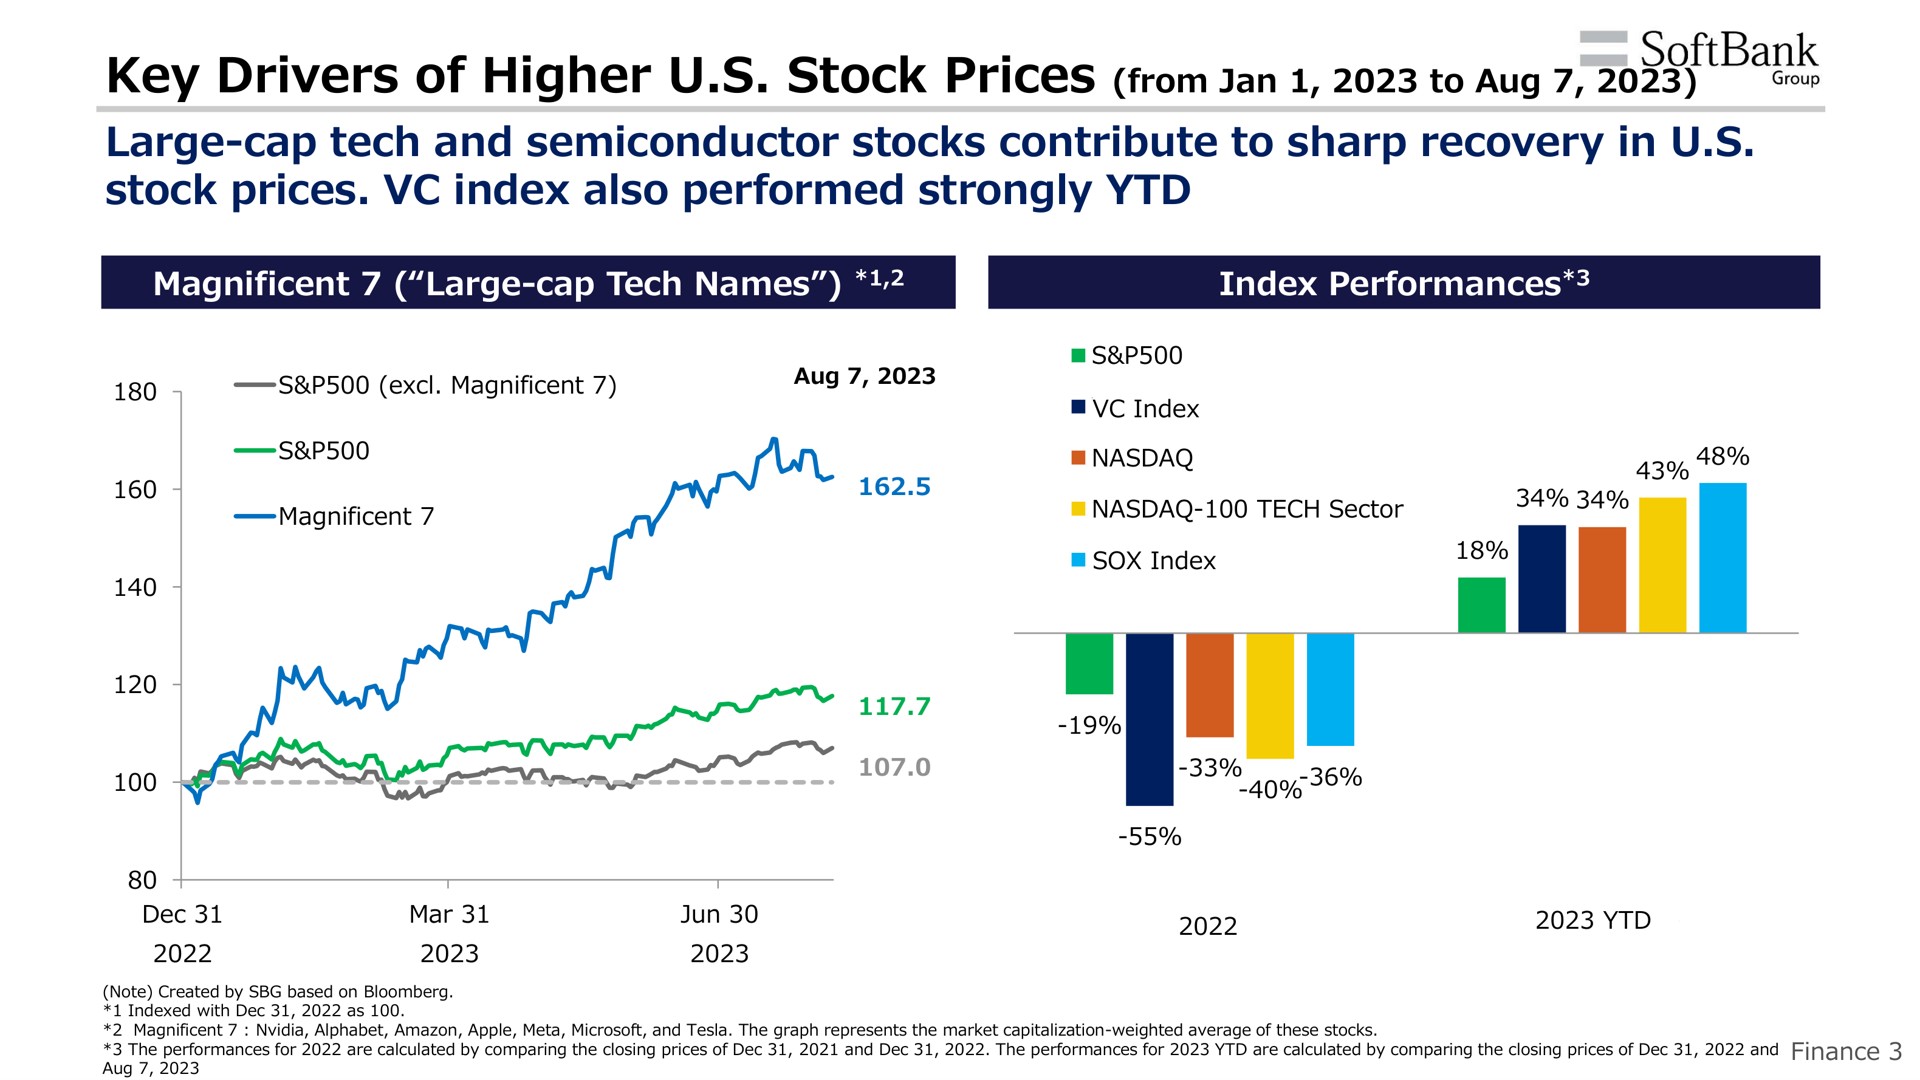 key drivers of higher stock prices from to | SoftBank